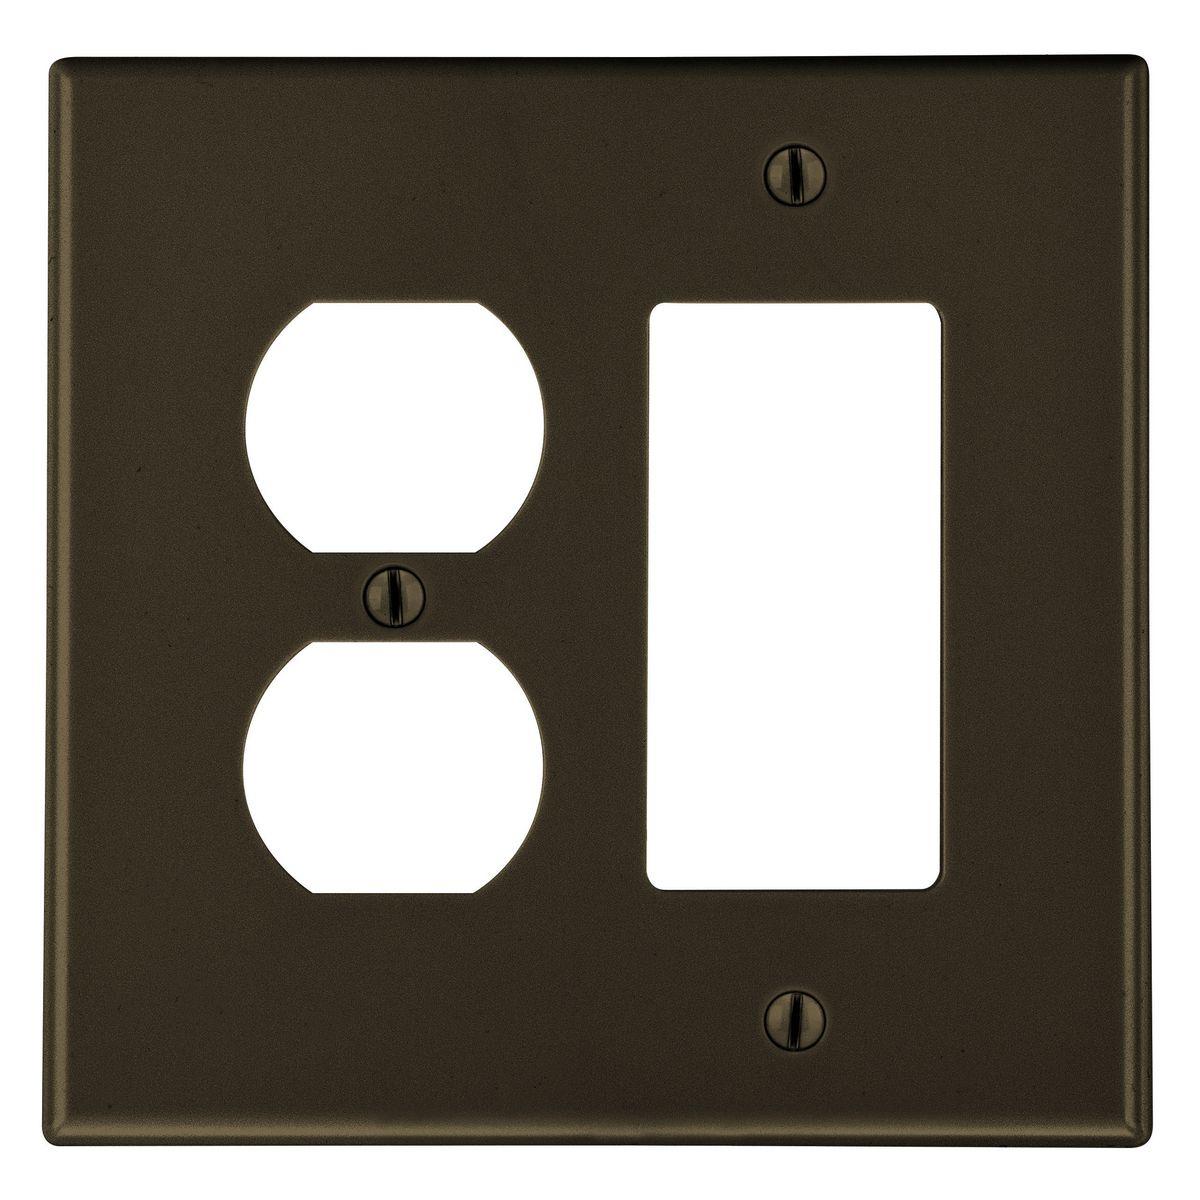 Hubbell PJ826 Wallplate, Mid-Size 2-Gang, 1) Duplex 1) Decorator, Brown  ; High-impact, self-extinguishing polycarbonate material ; More Rigid ; Sharp lines and less dimpling ; Smooth satin finish ; Blends into wall with an optimum finish ; Smooth Satin Finish